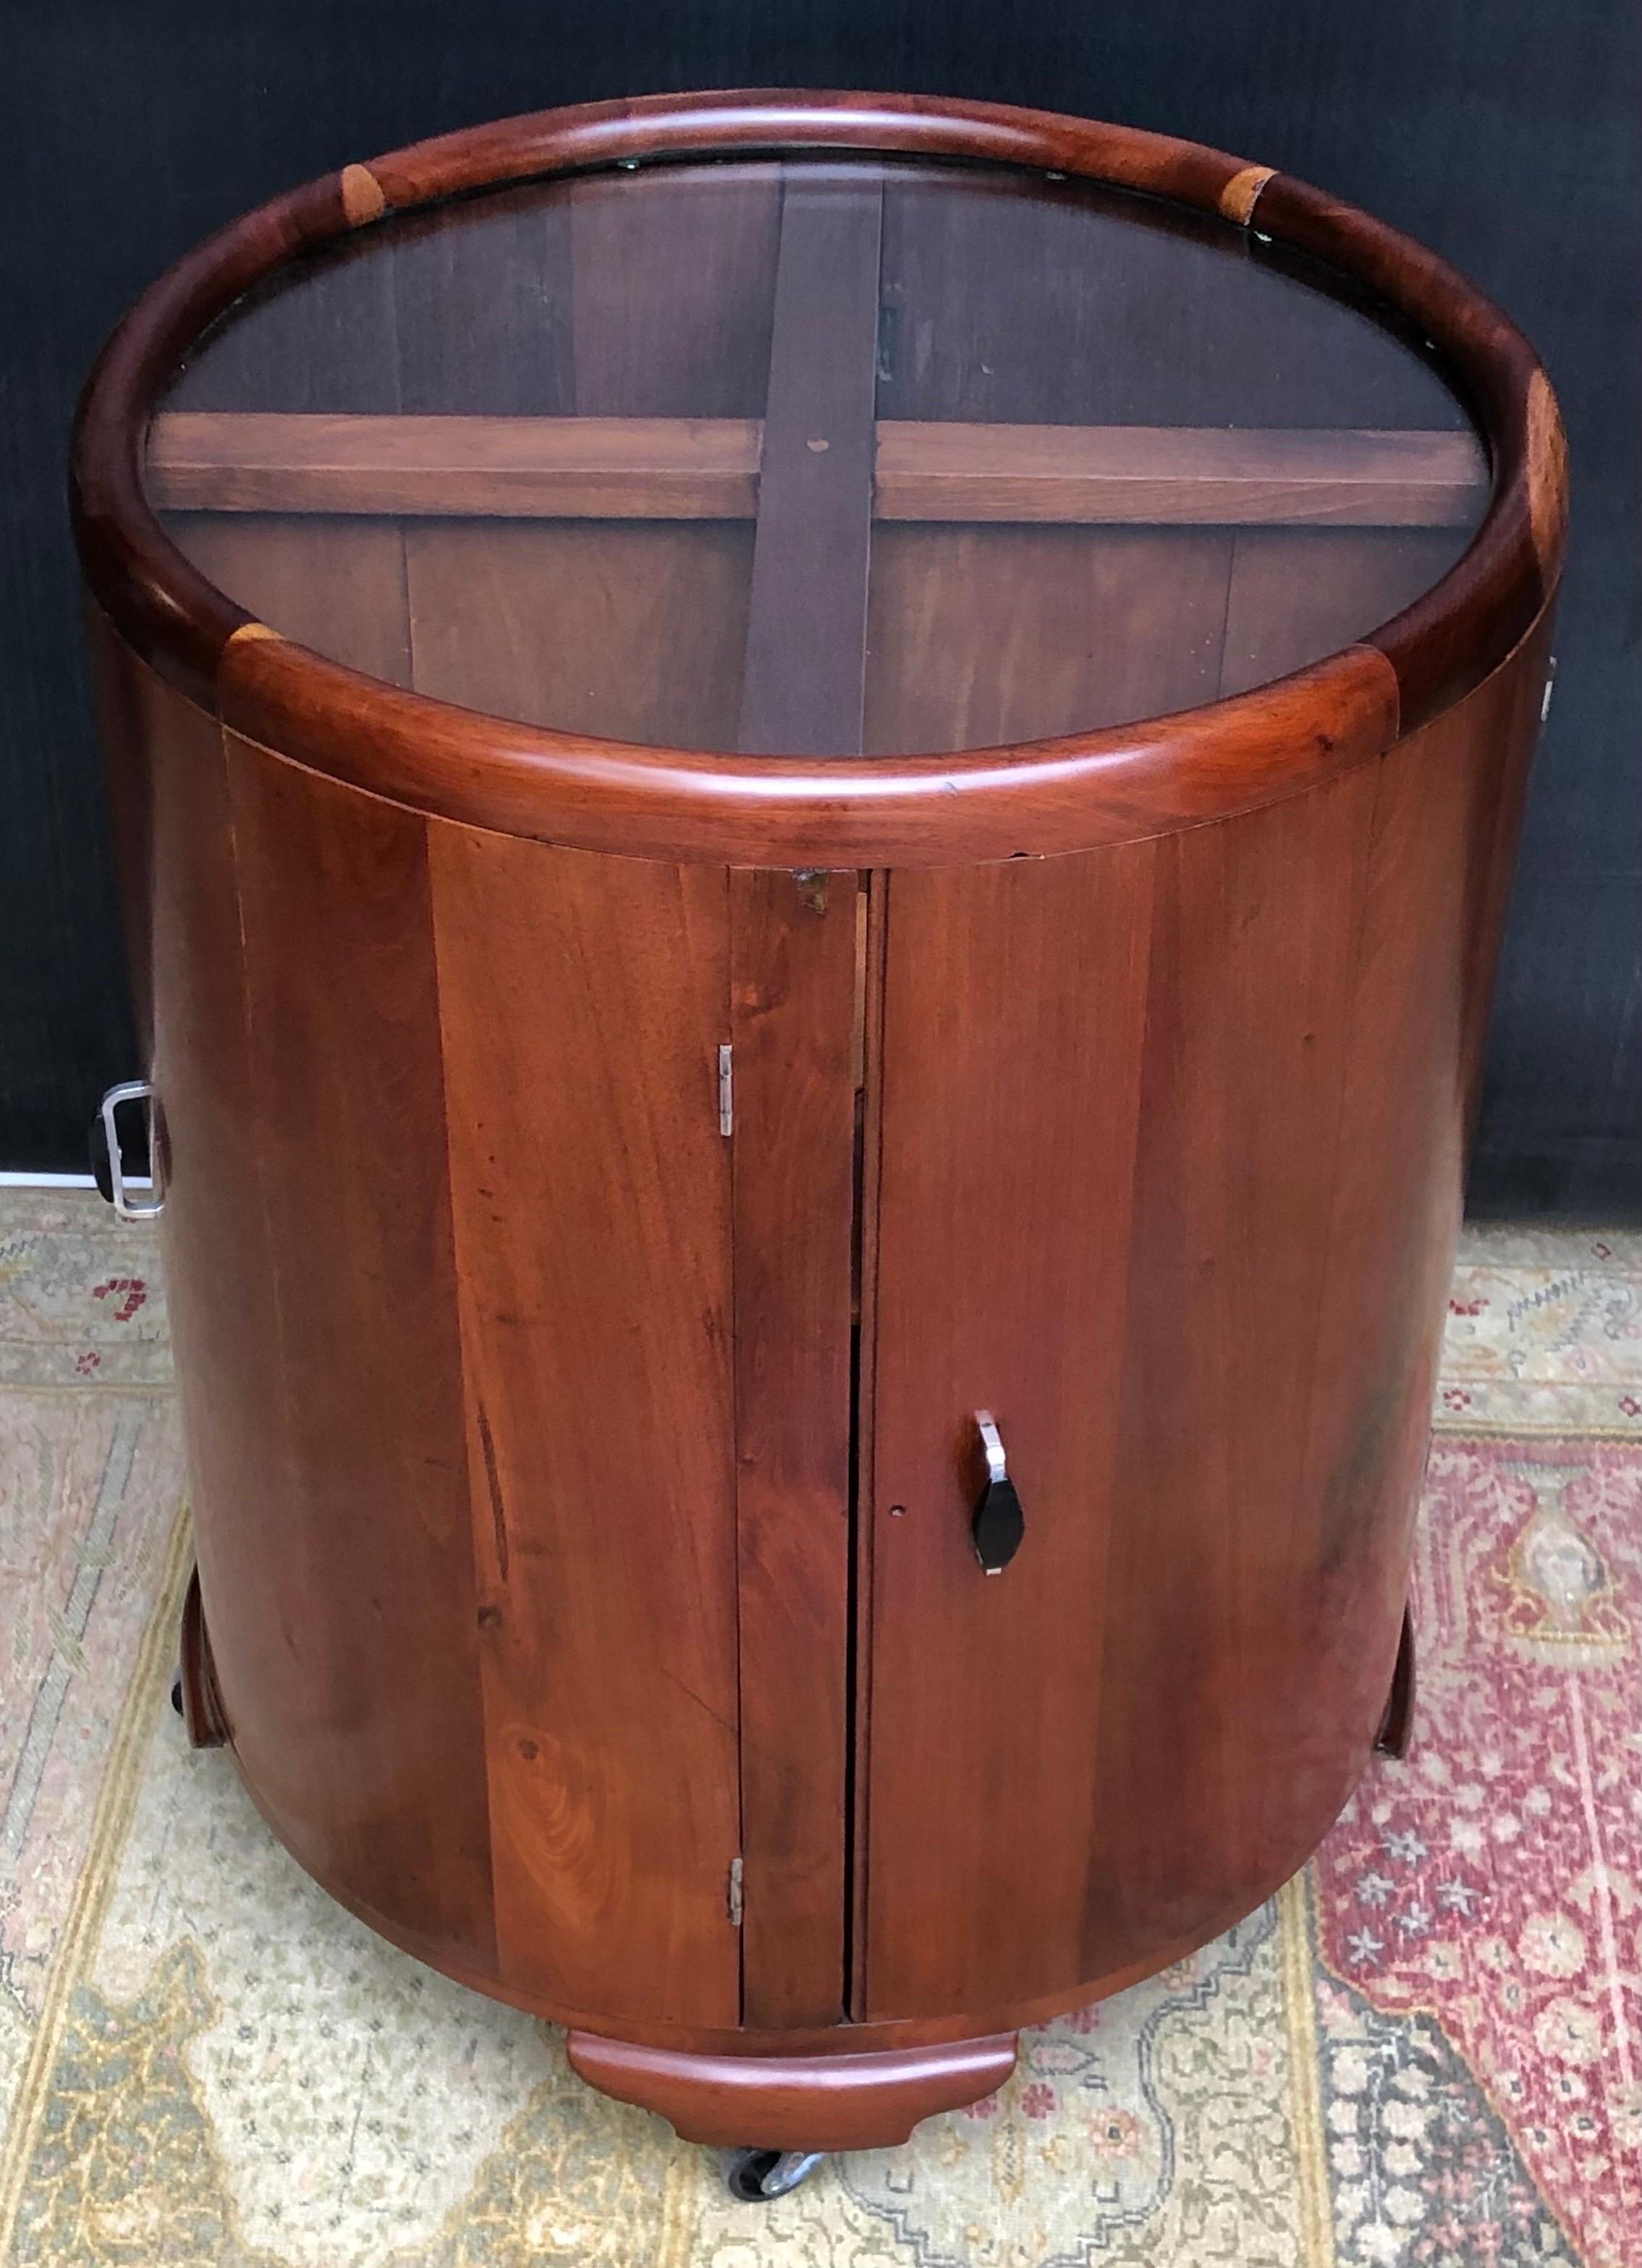 Jamaican Art Deco Round Bar/Cocktail Cabinet By Burnett Webster(circa.1934-1939) For Sale 1